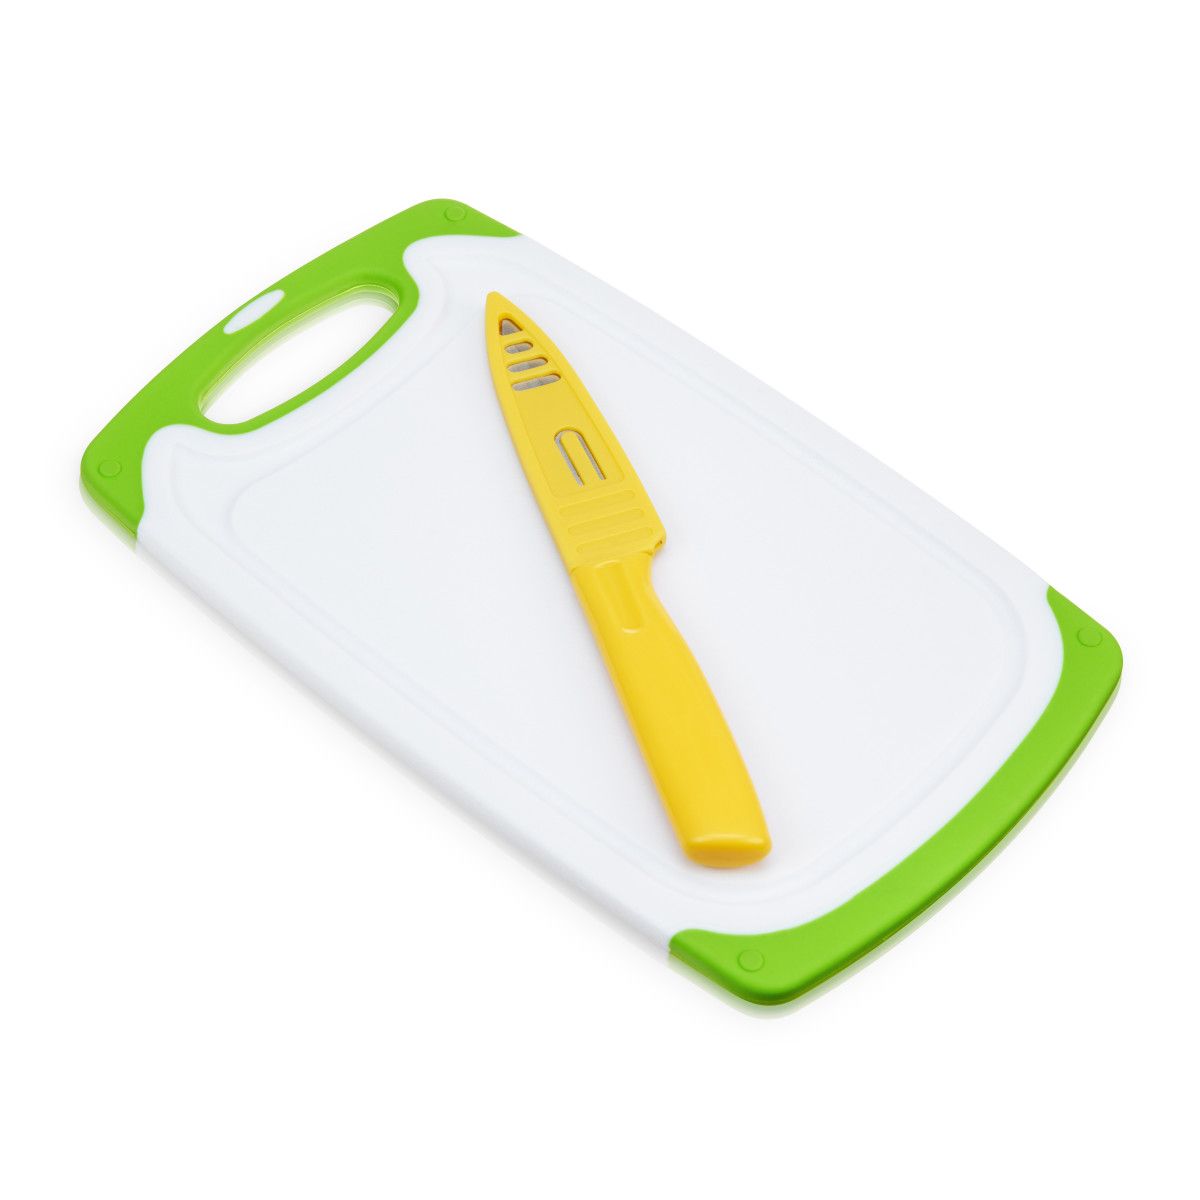 True Paring Knife and Cutting Board Set